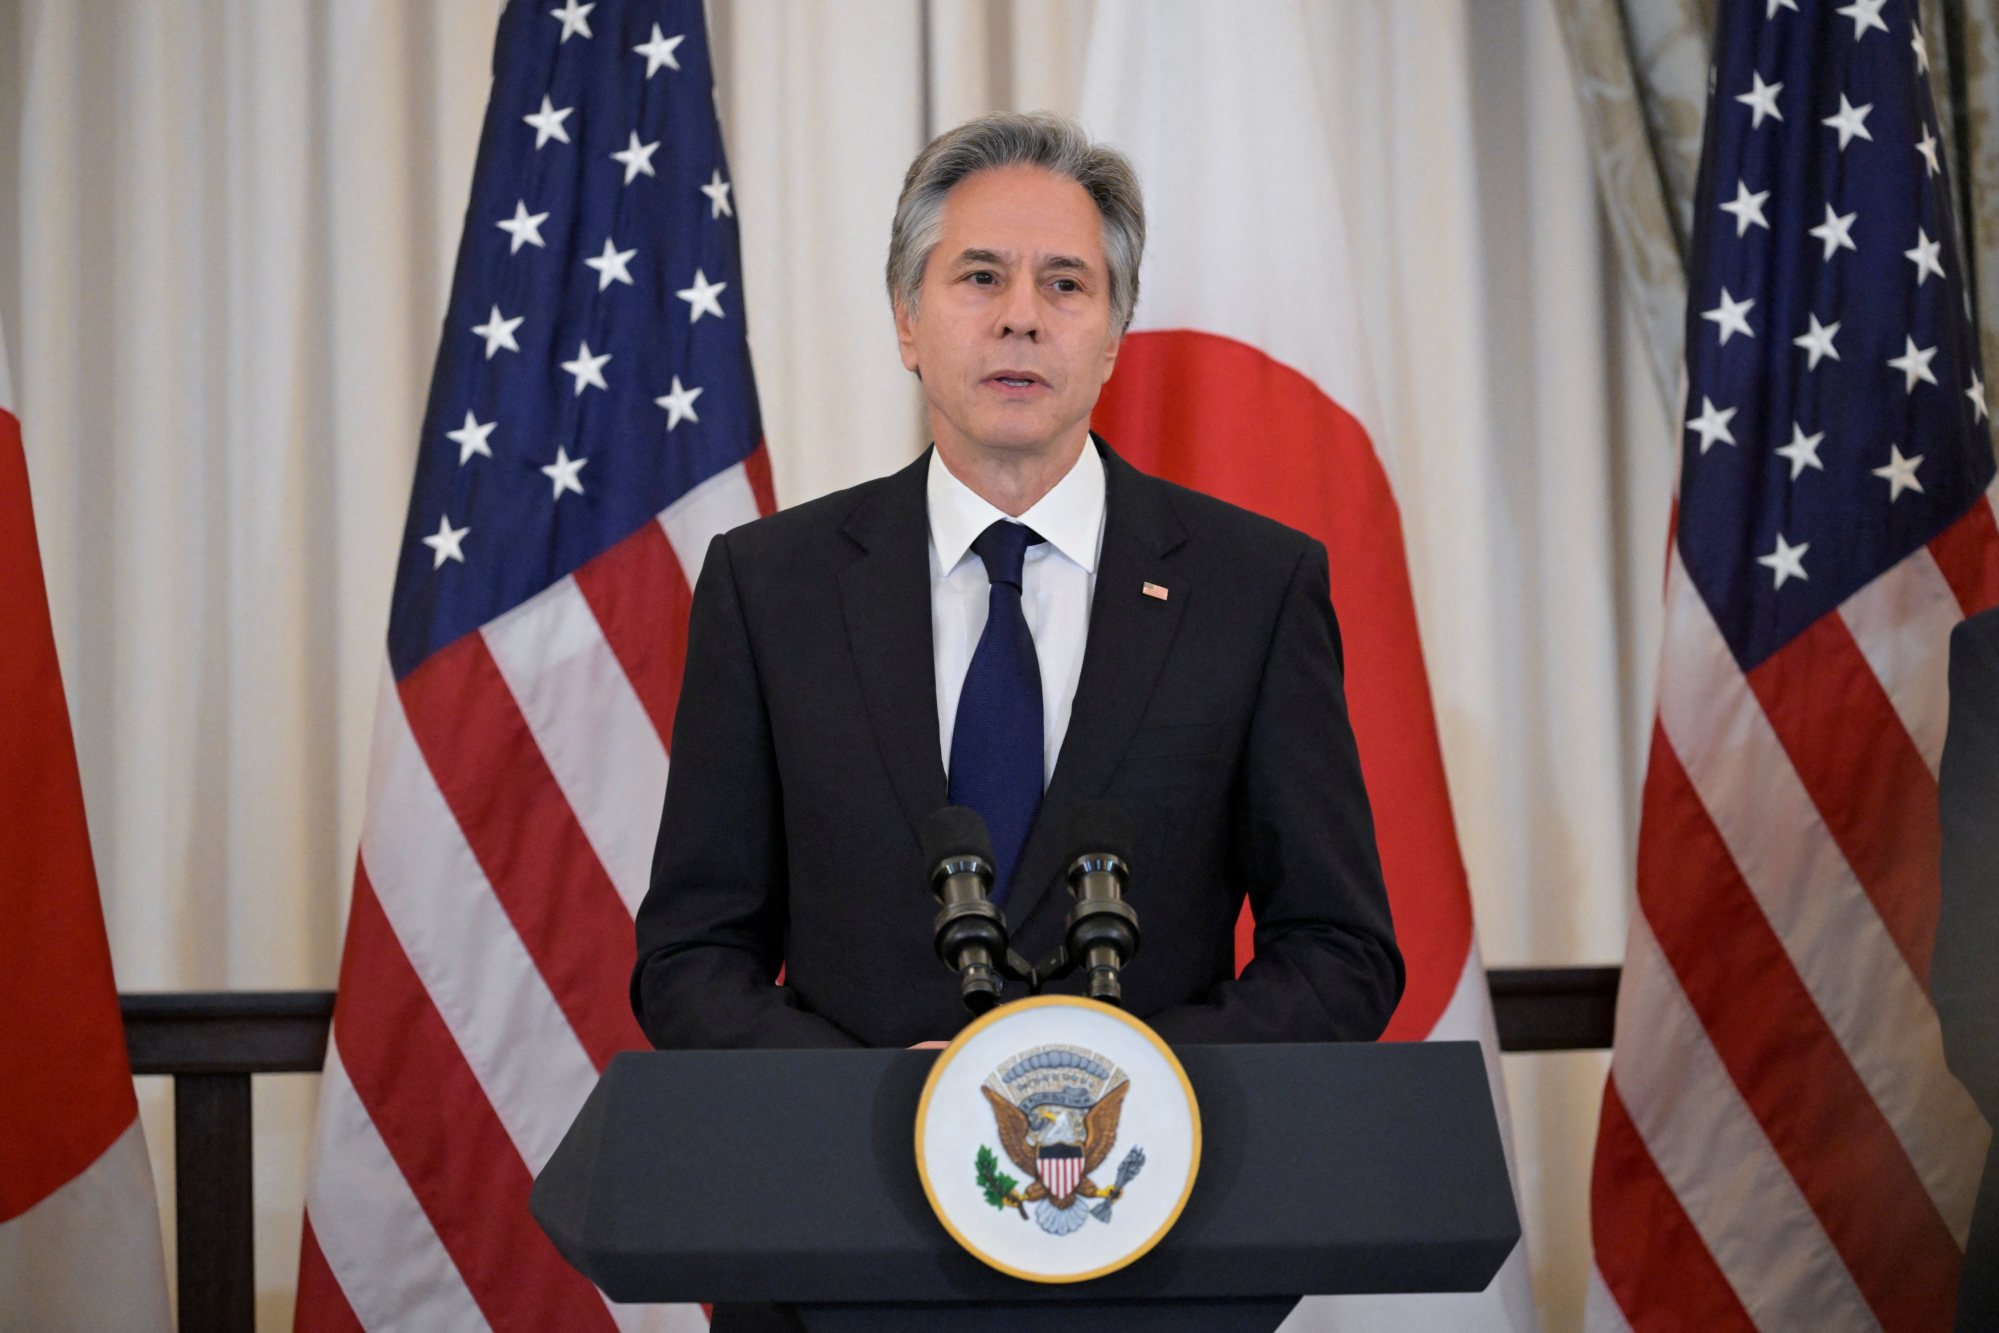 US Secretary of State Antony Blinken has mentioned visa restrictions on certain officials. Photo: Reuters